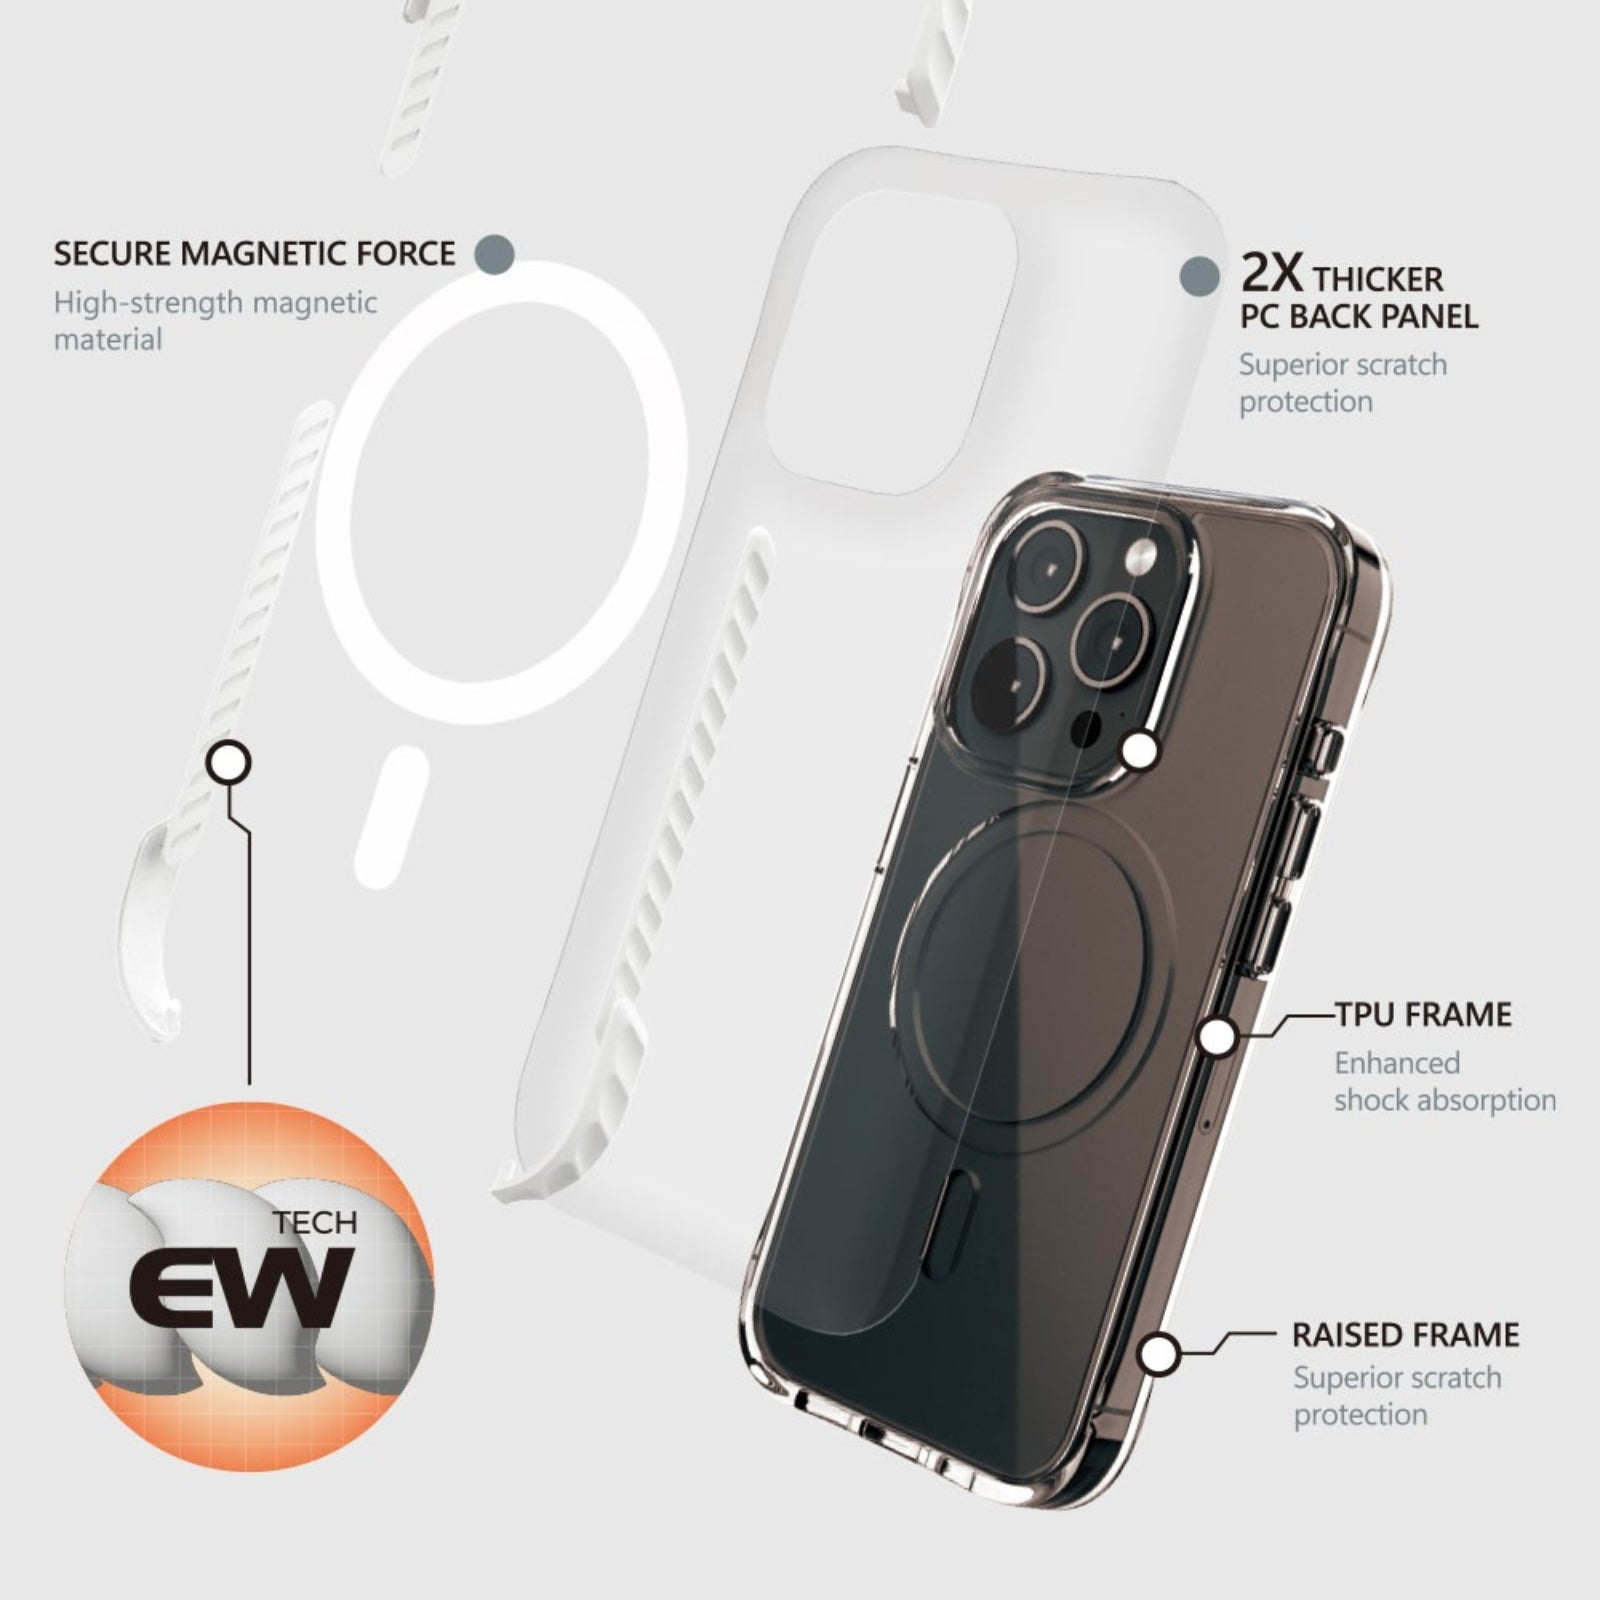 ReDefine Echo Wave Ultimate Impact Protection Case for iPhone 15